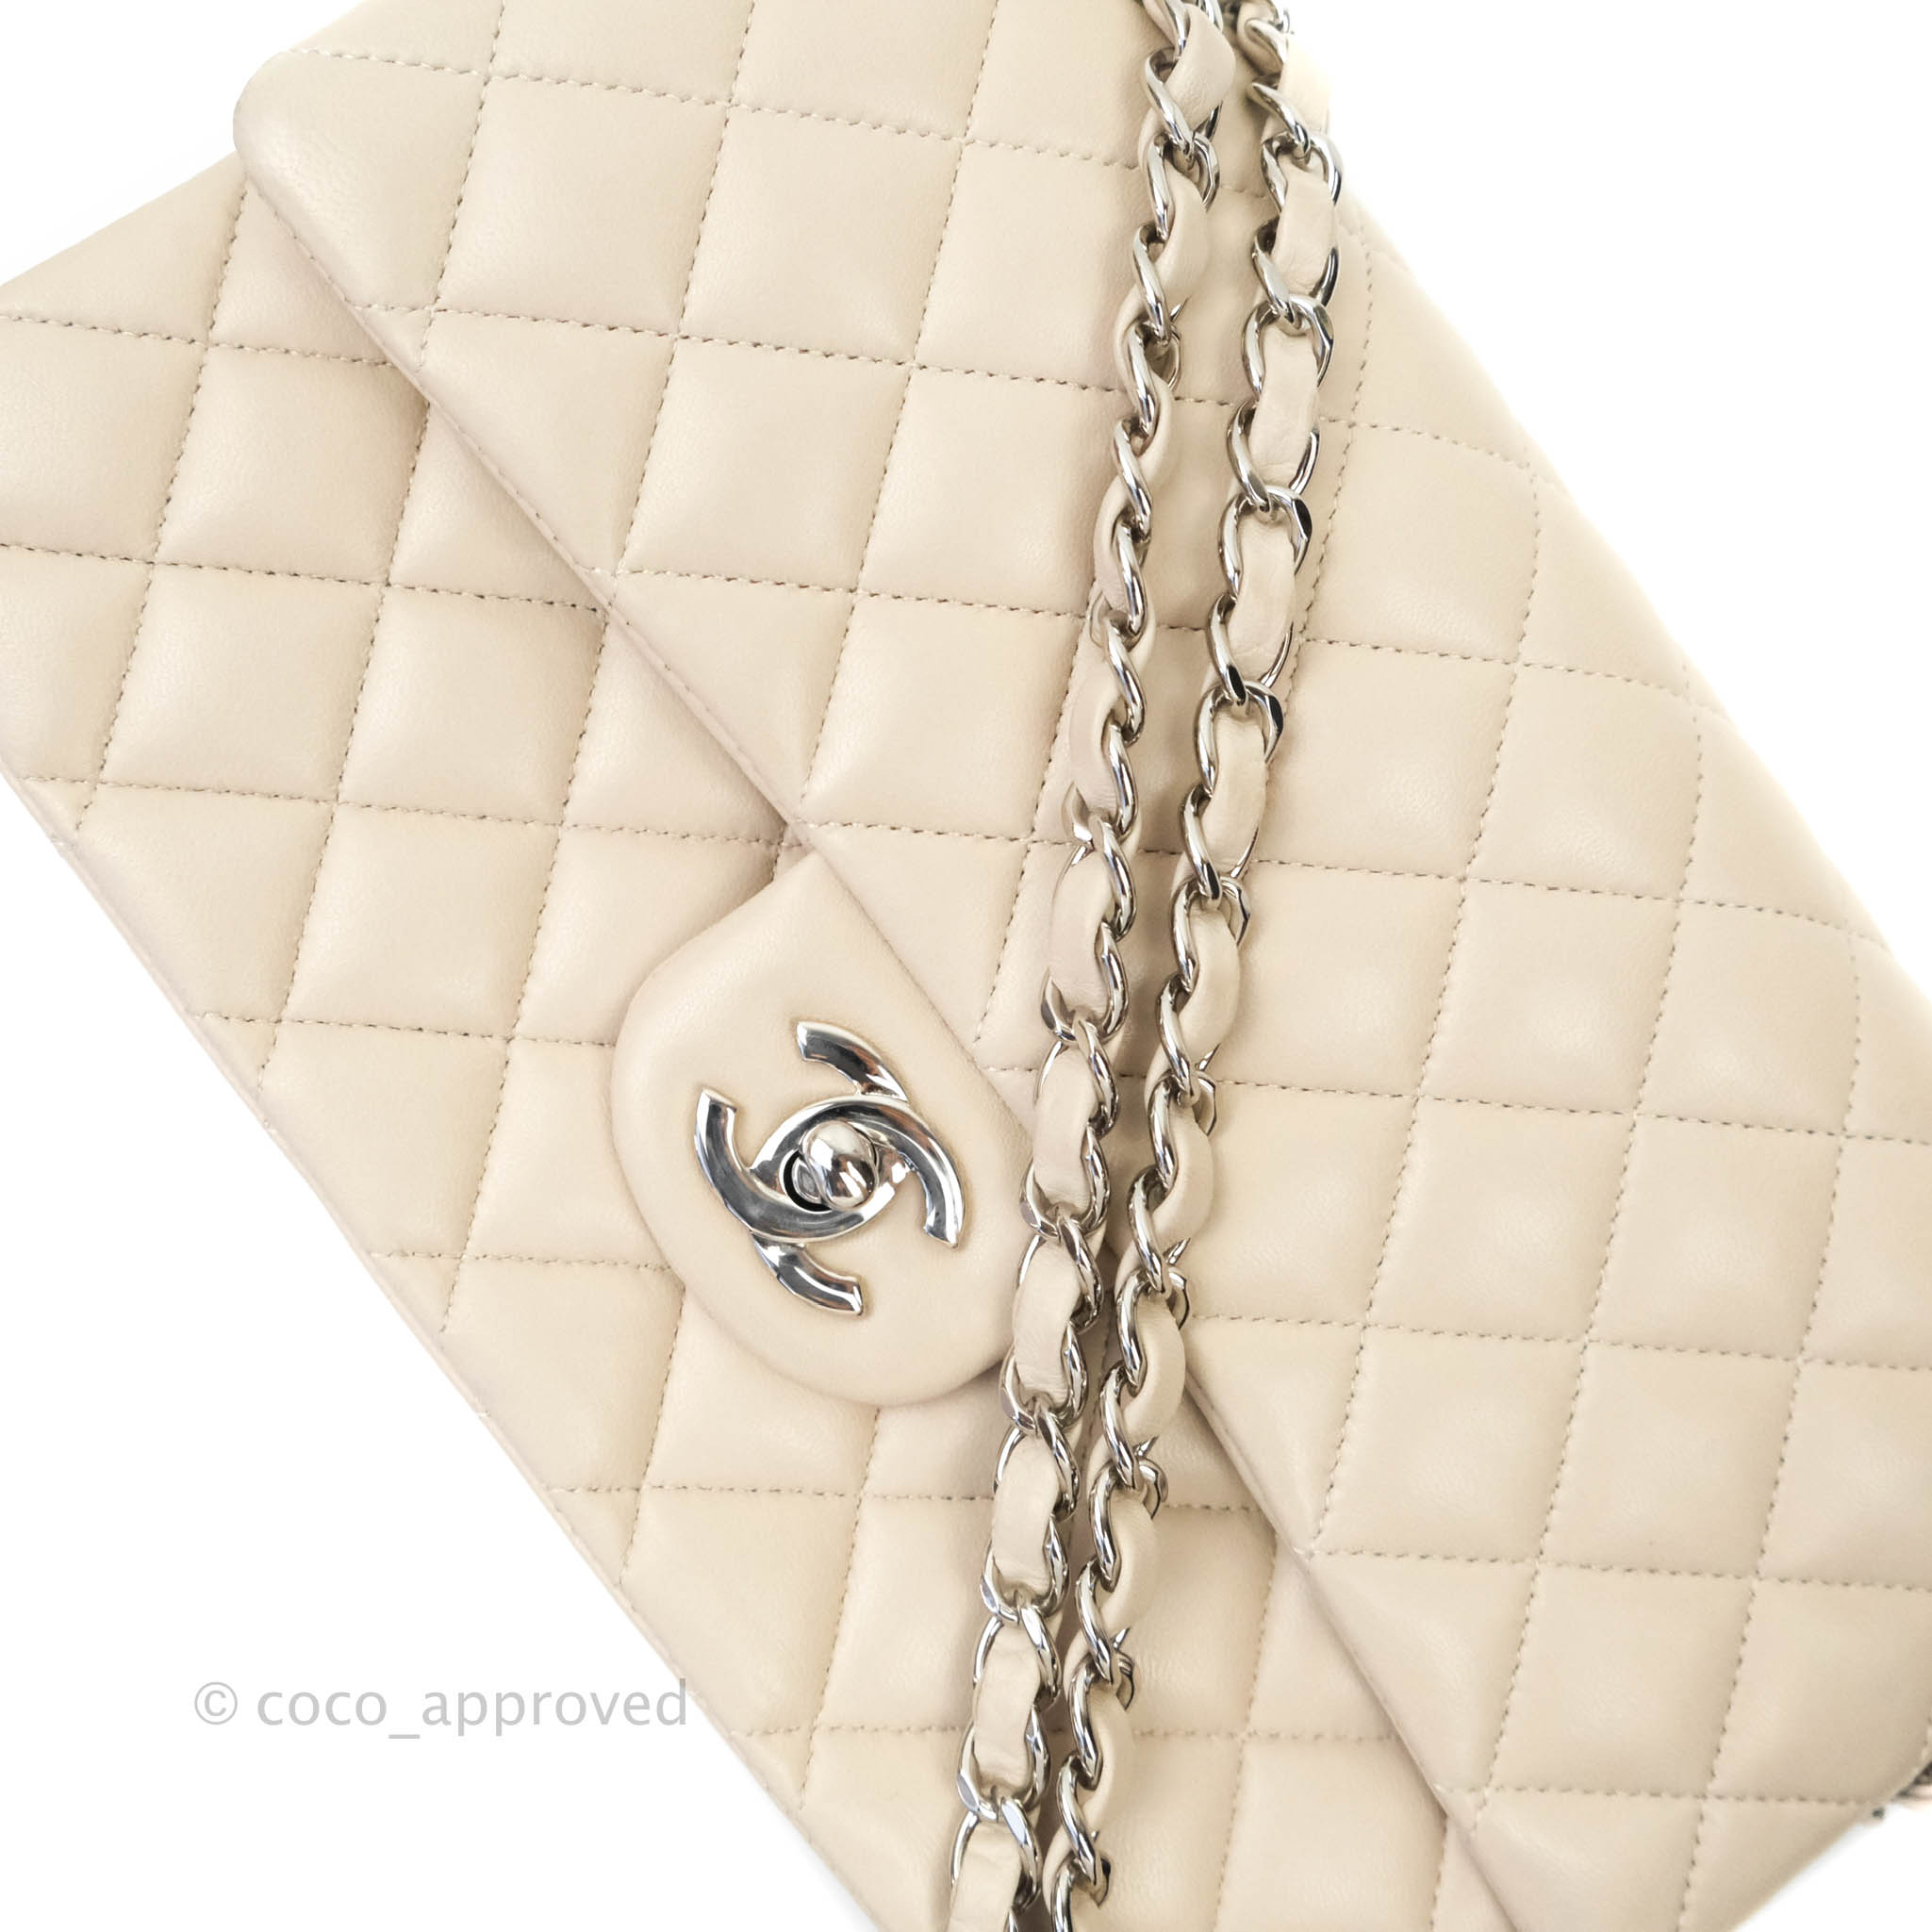 Chanel Cream Medium Double Flap Bag in Lambskin With Silver Hardware RRP - £8,530